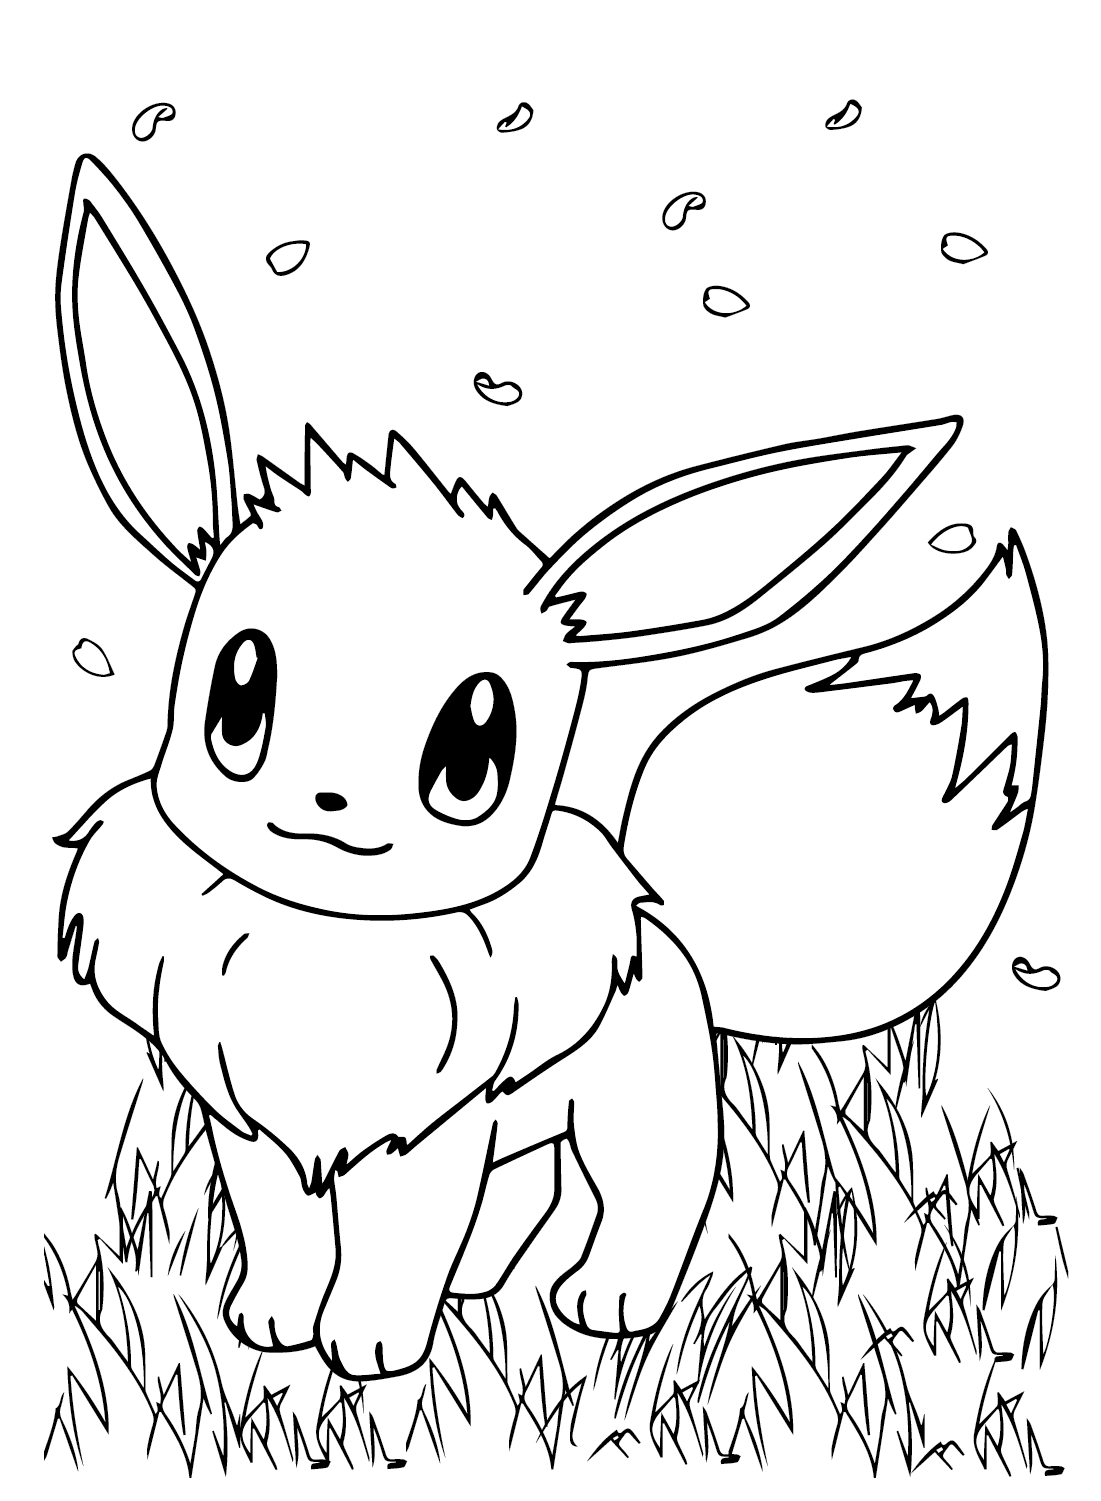 200 Eevee Coloring Pages: Evolve Your Art Skills 62